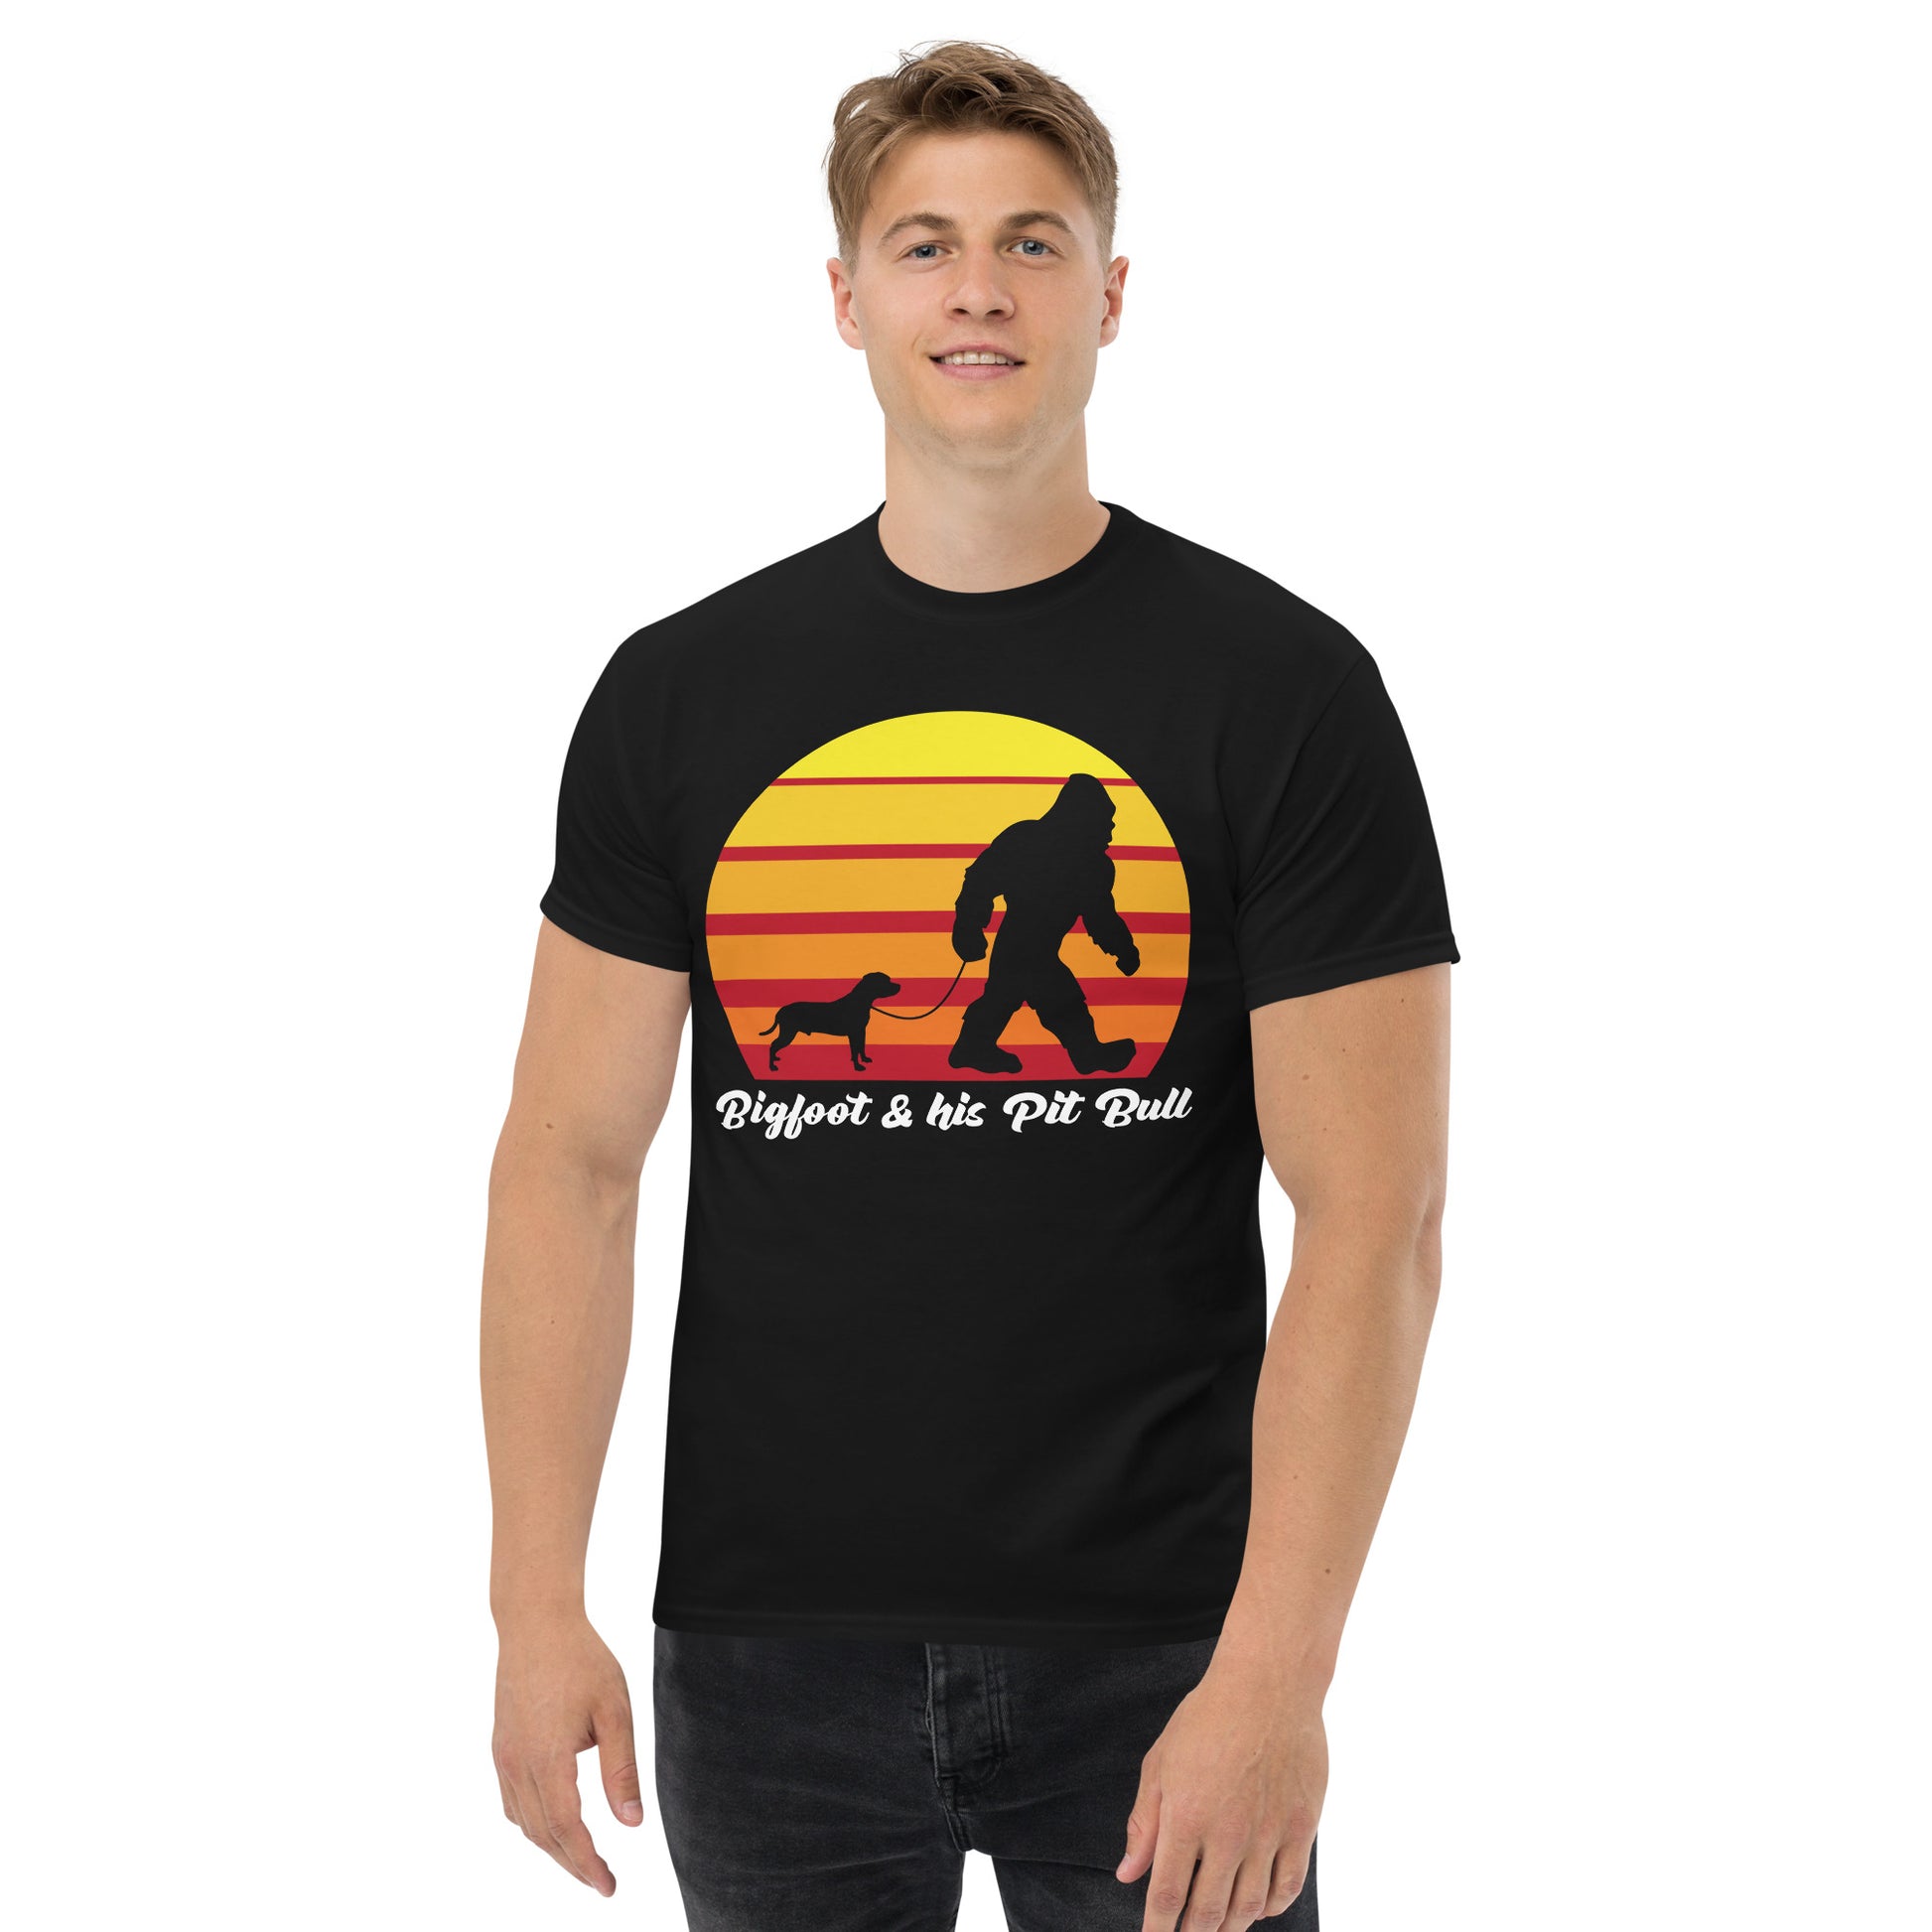 Bigfoot and his American Pit Bull men’s black t-shirt by Dog Artistry.